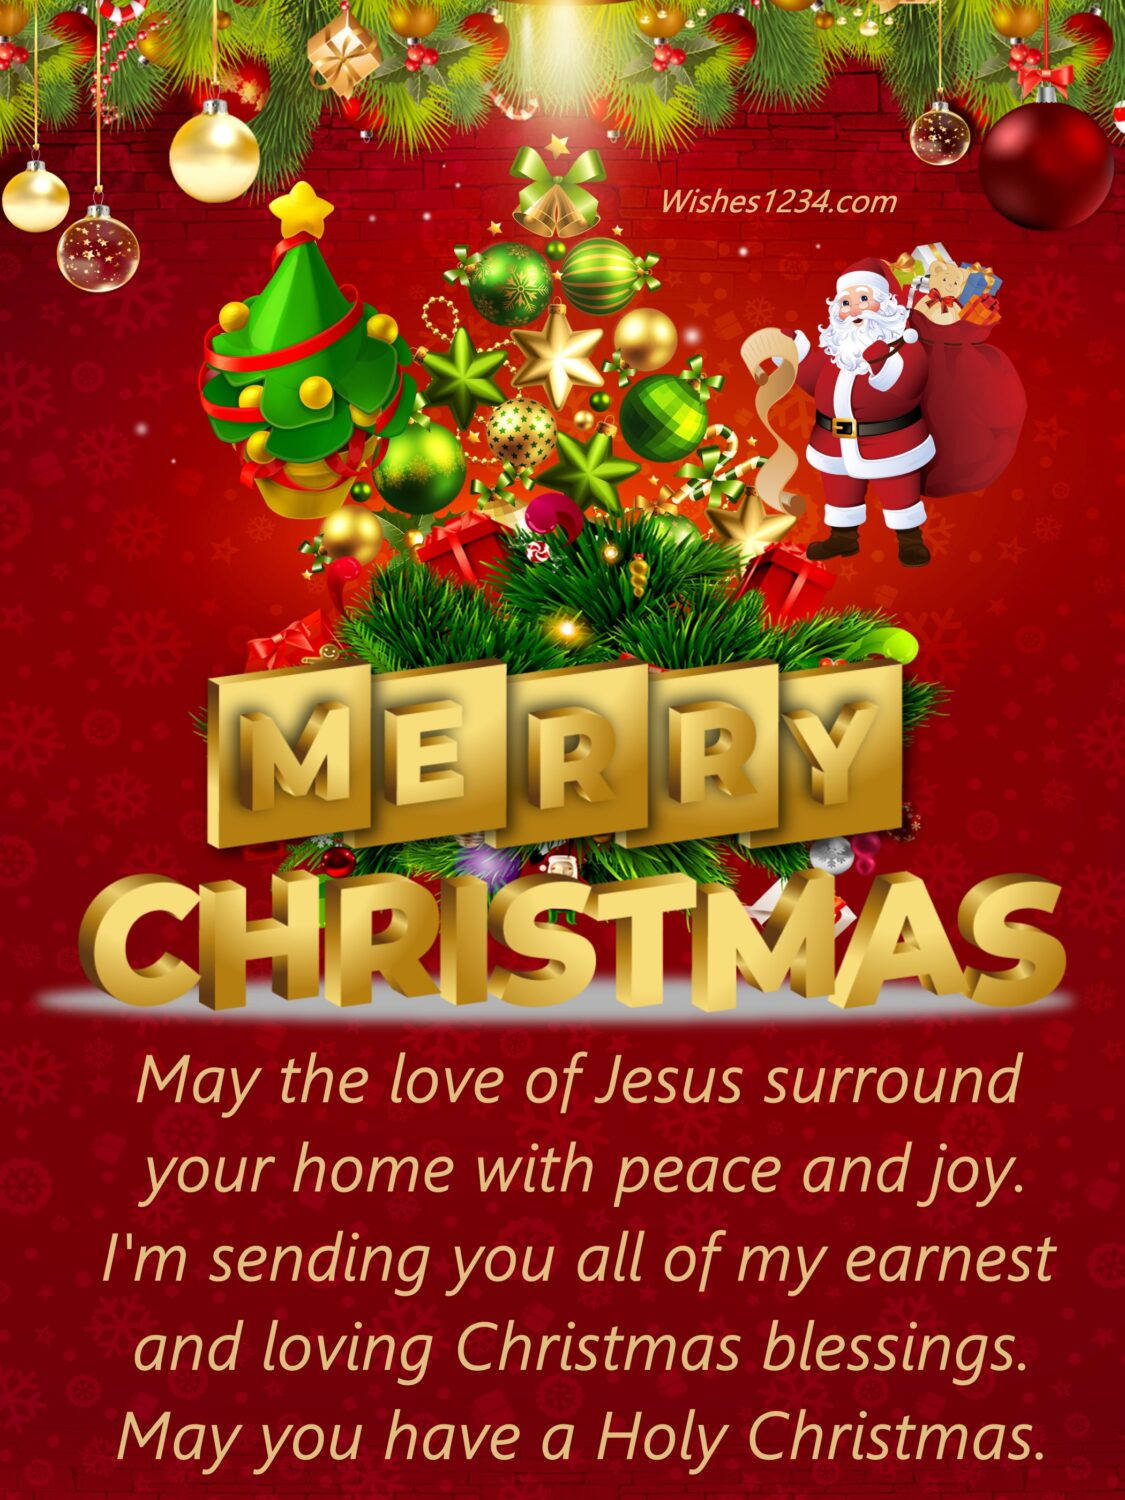 Merry Christmas to everyone who has lost someone near and dear to them